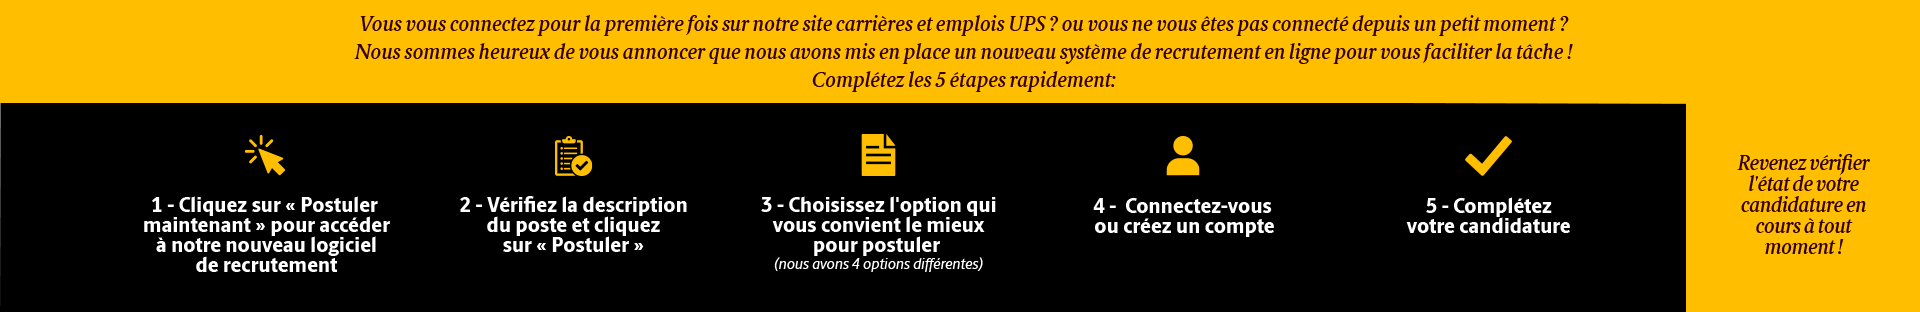 New to UPS? or Maybe you haven't stopped by in a while?  We are happy to share that we have a new system in place to make applying easier for you! 5 Easy Steps: (1) Find a job you like the look of on upsjobs.com (2) Review job description & click 'Apply' (3) Choose your application method (4) Login or create an account (5) Complete your application. Come back & check the status of your application at any time!